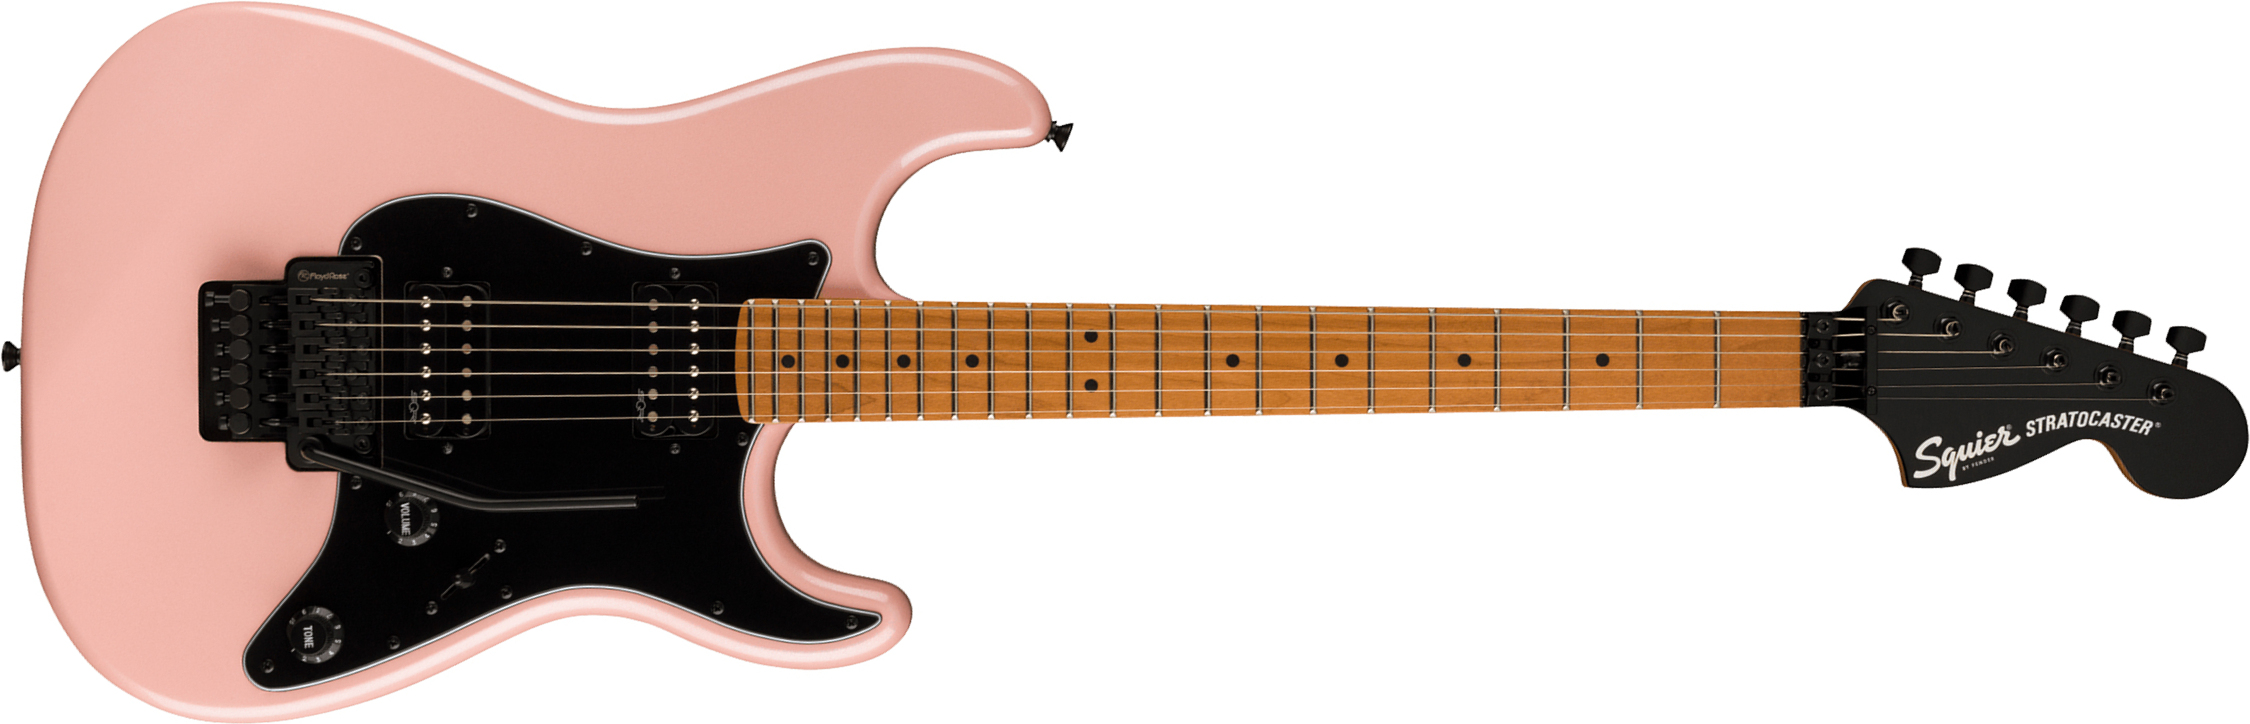 Squier Strat Contemporary Hh Fr Mn - Shell Pink Pearl - Str shape electric guitar - Main picture